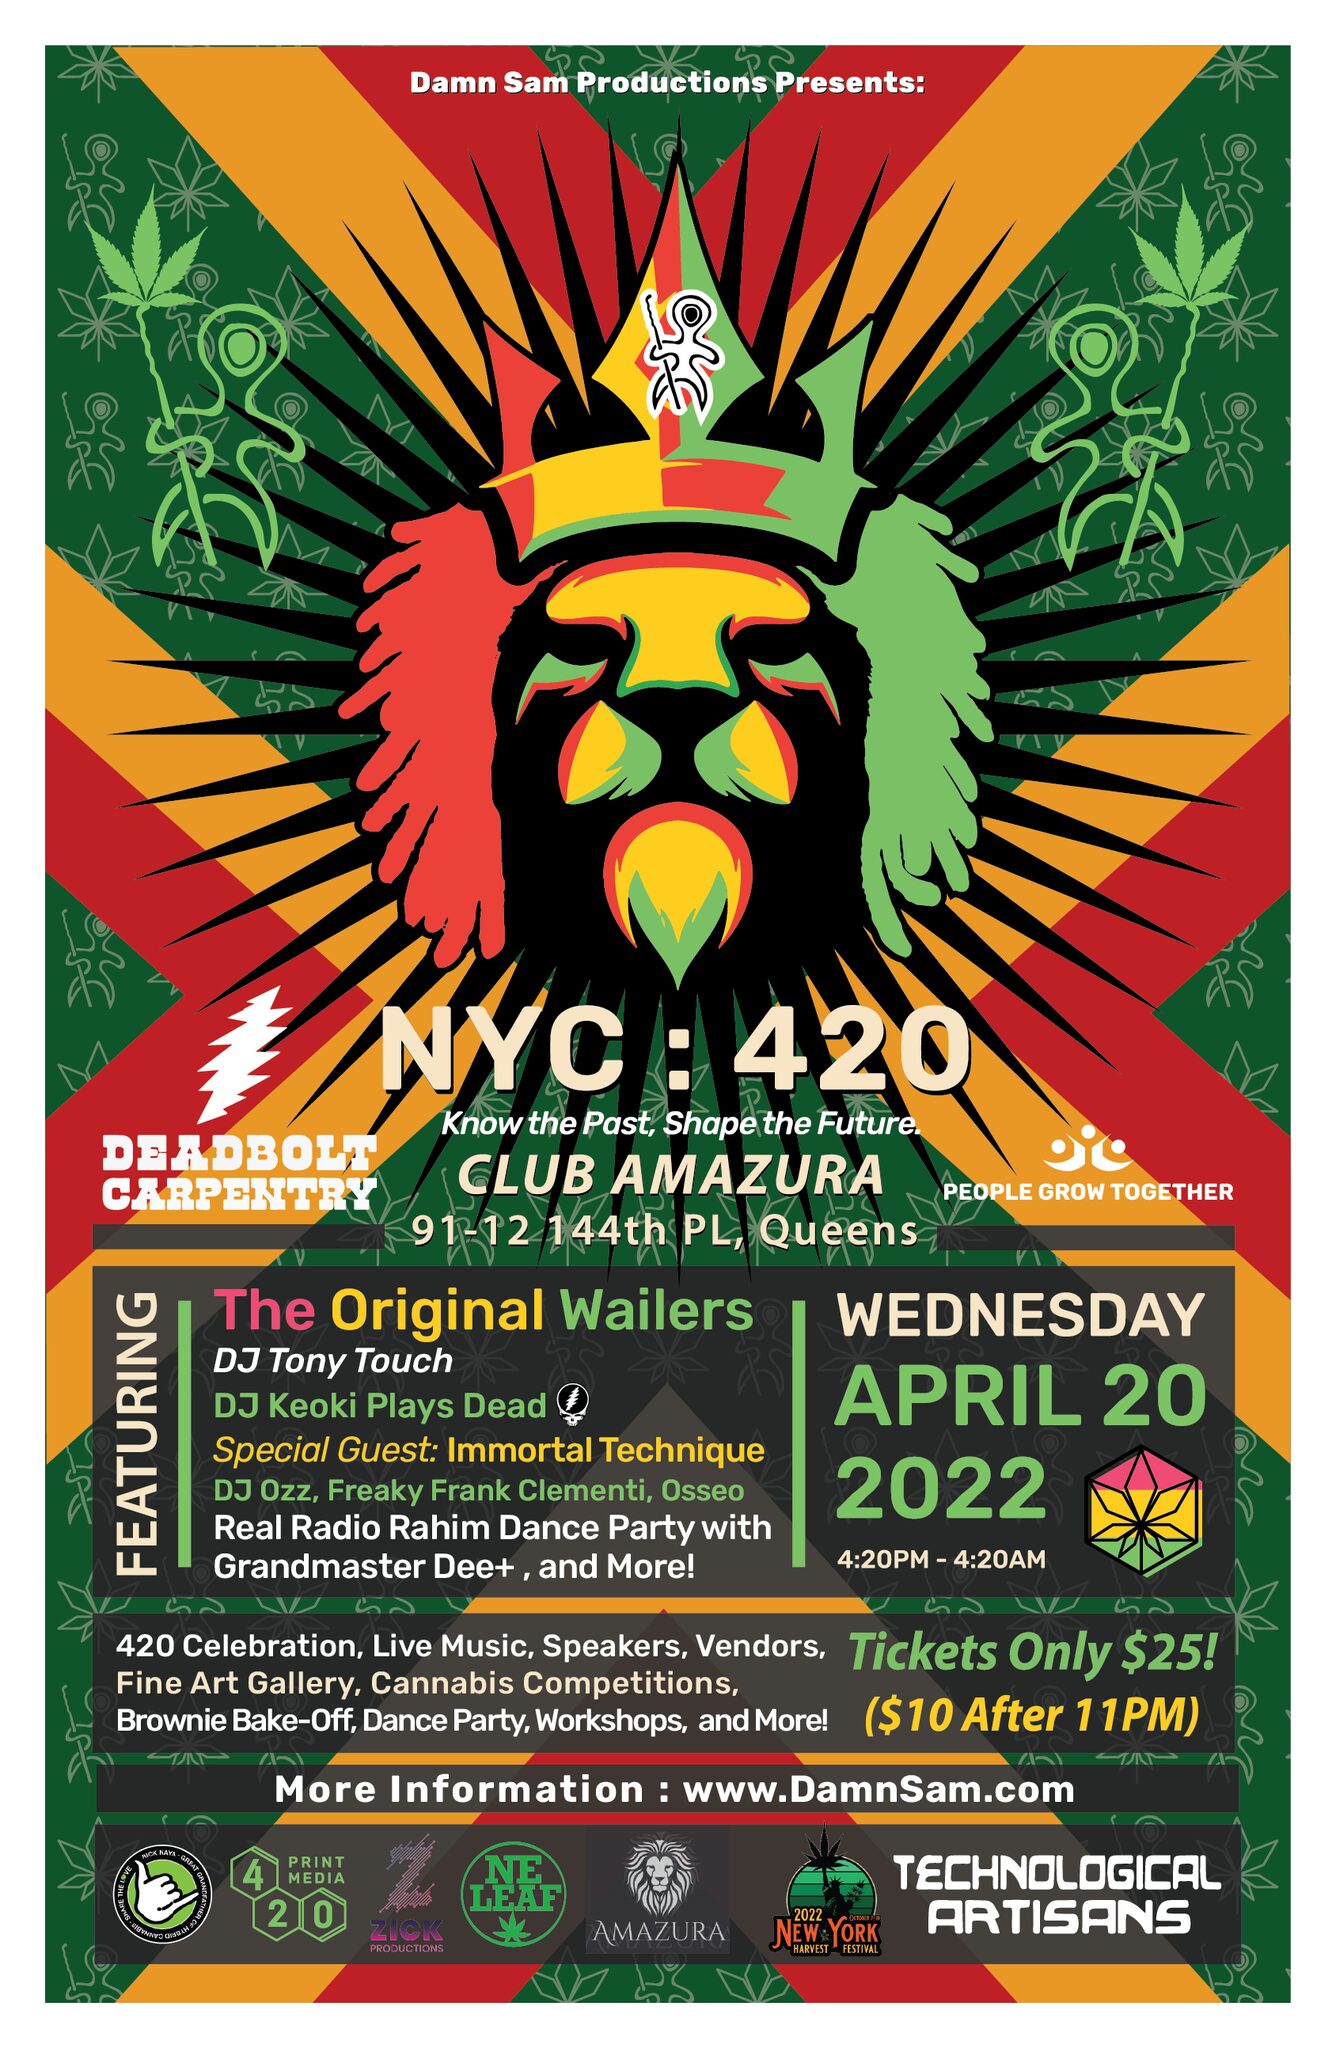 420 Celebration Brings Cannabis Culture to Queens